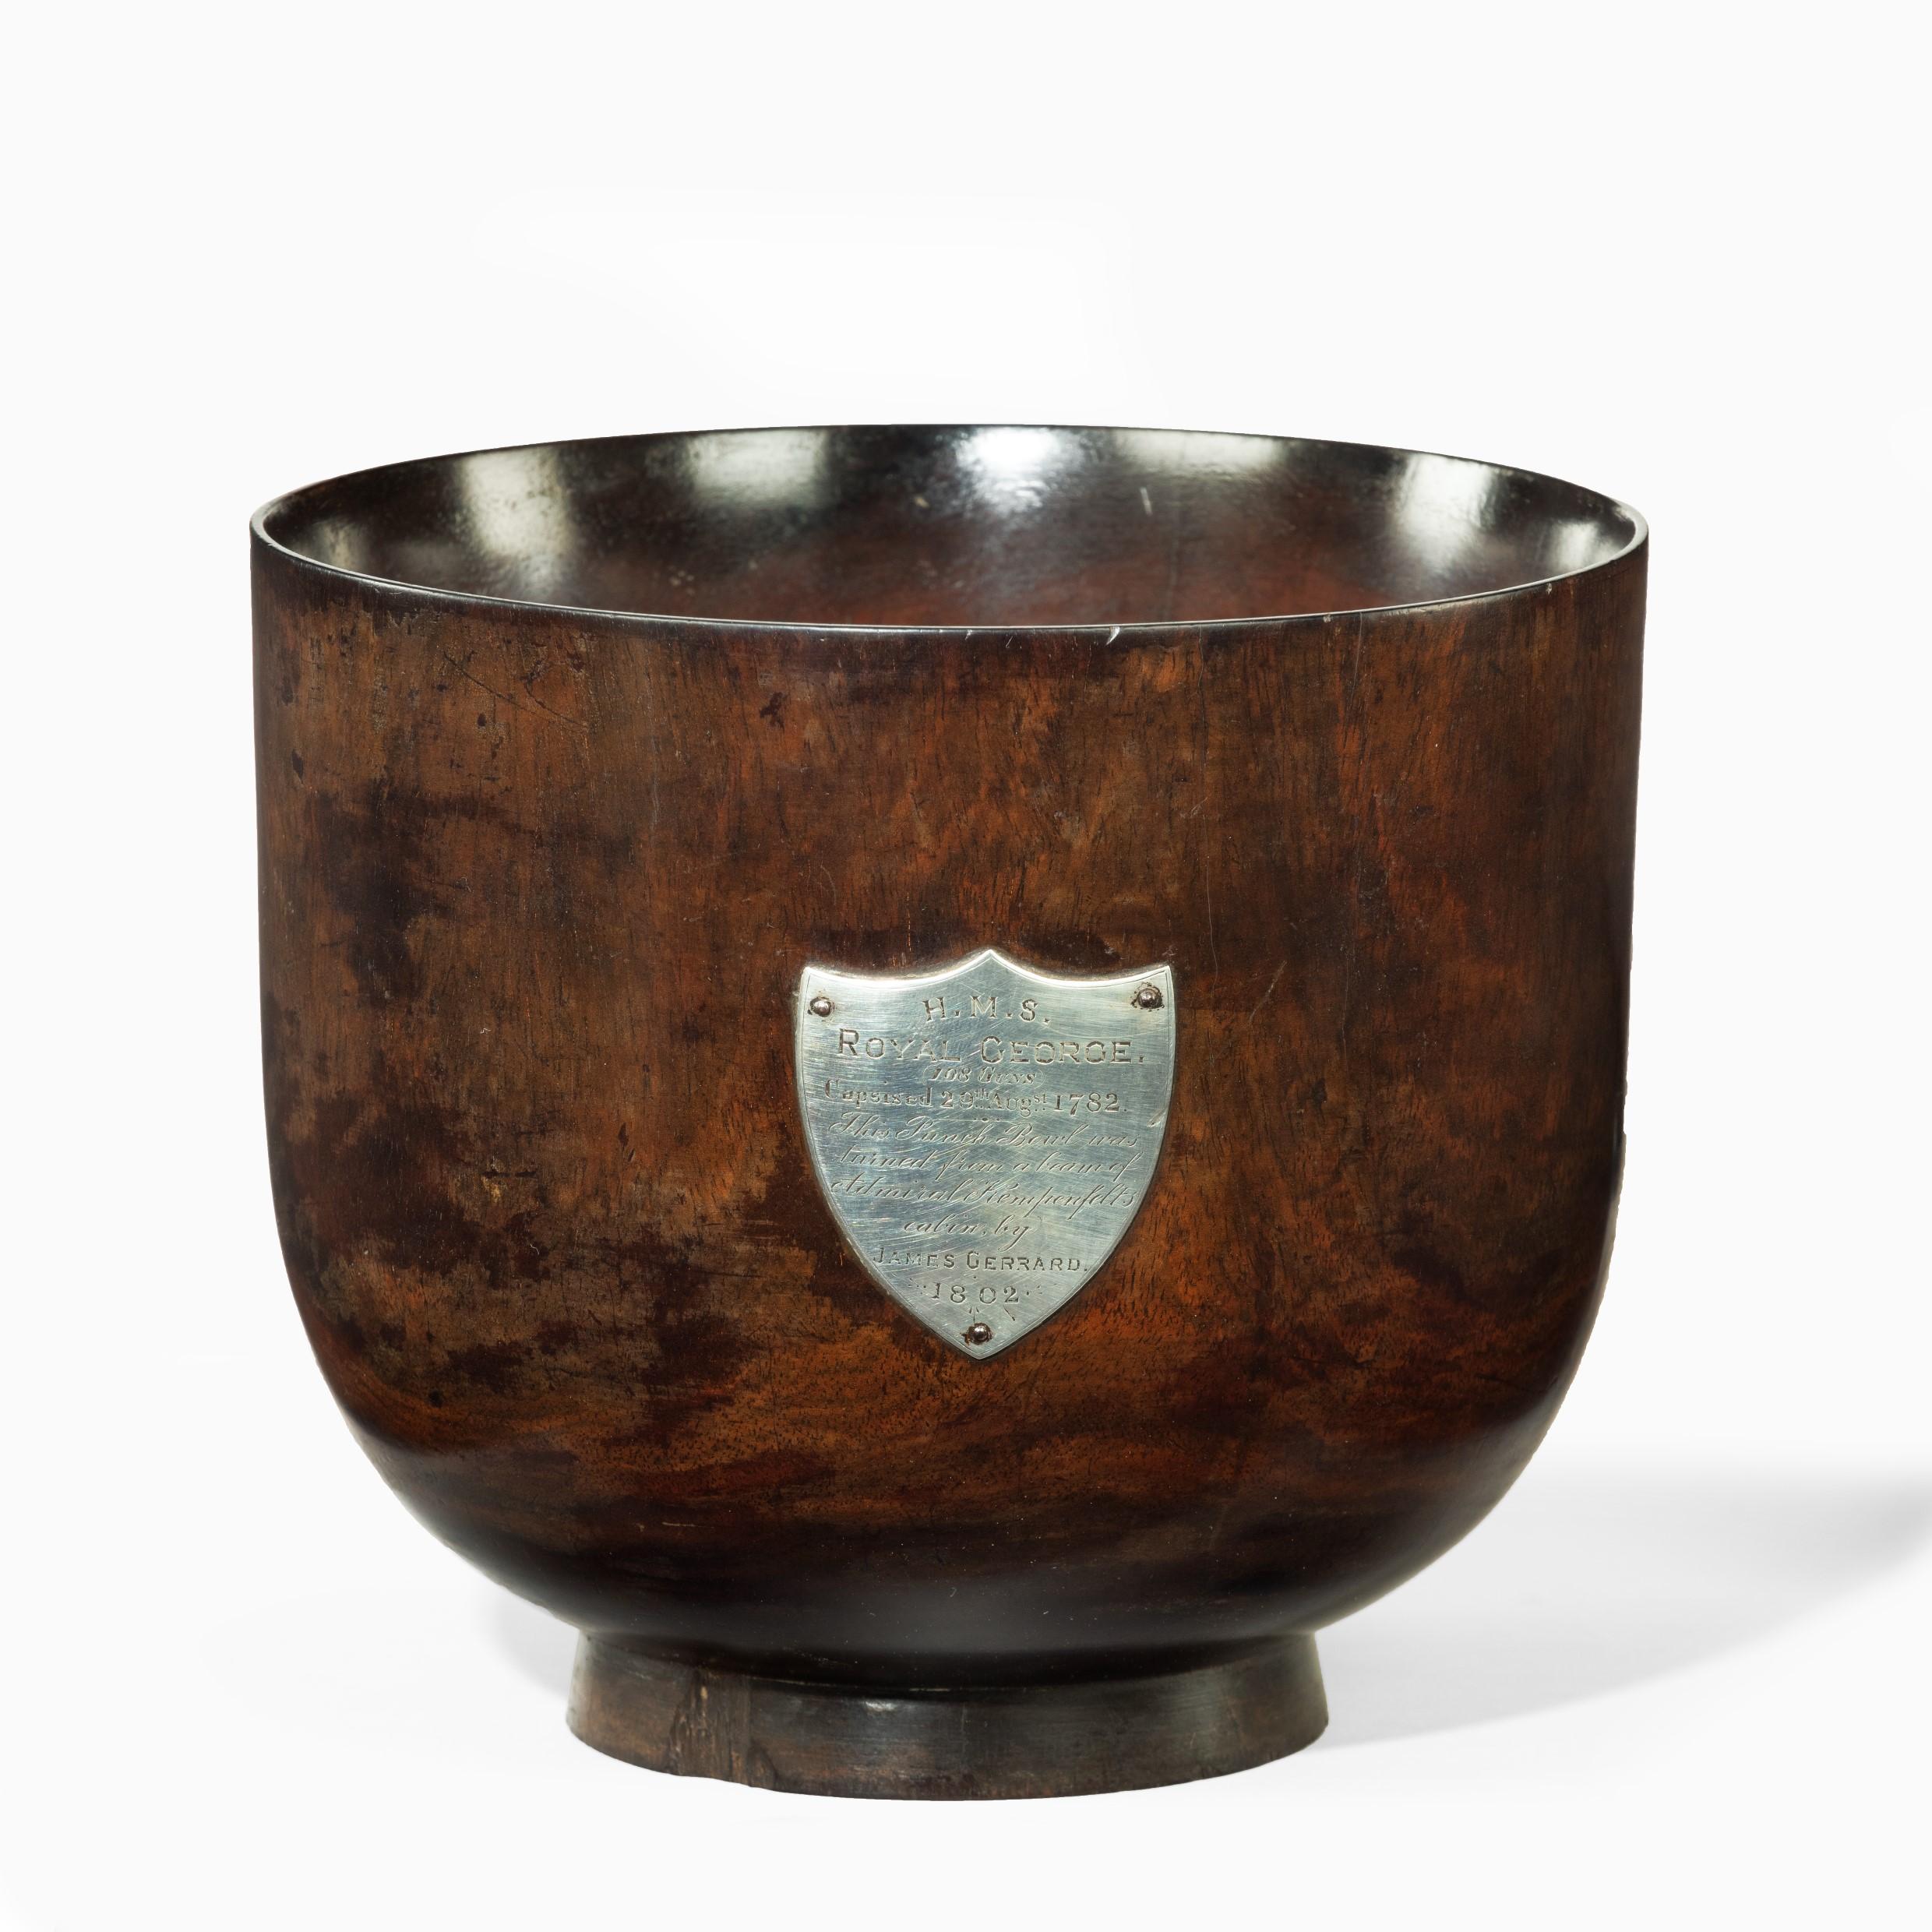 This turned commemorative oak bowl is of deep cylindrical form applied with a silver shield-shaped plaque inscribed ‘H.M.S. Royal George. (108 Guns) Capsised 29th Augst. 1782. This Punch Bowl was turned from a beam of Admiral Kempenfelts cabin, by